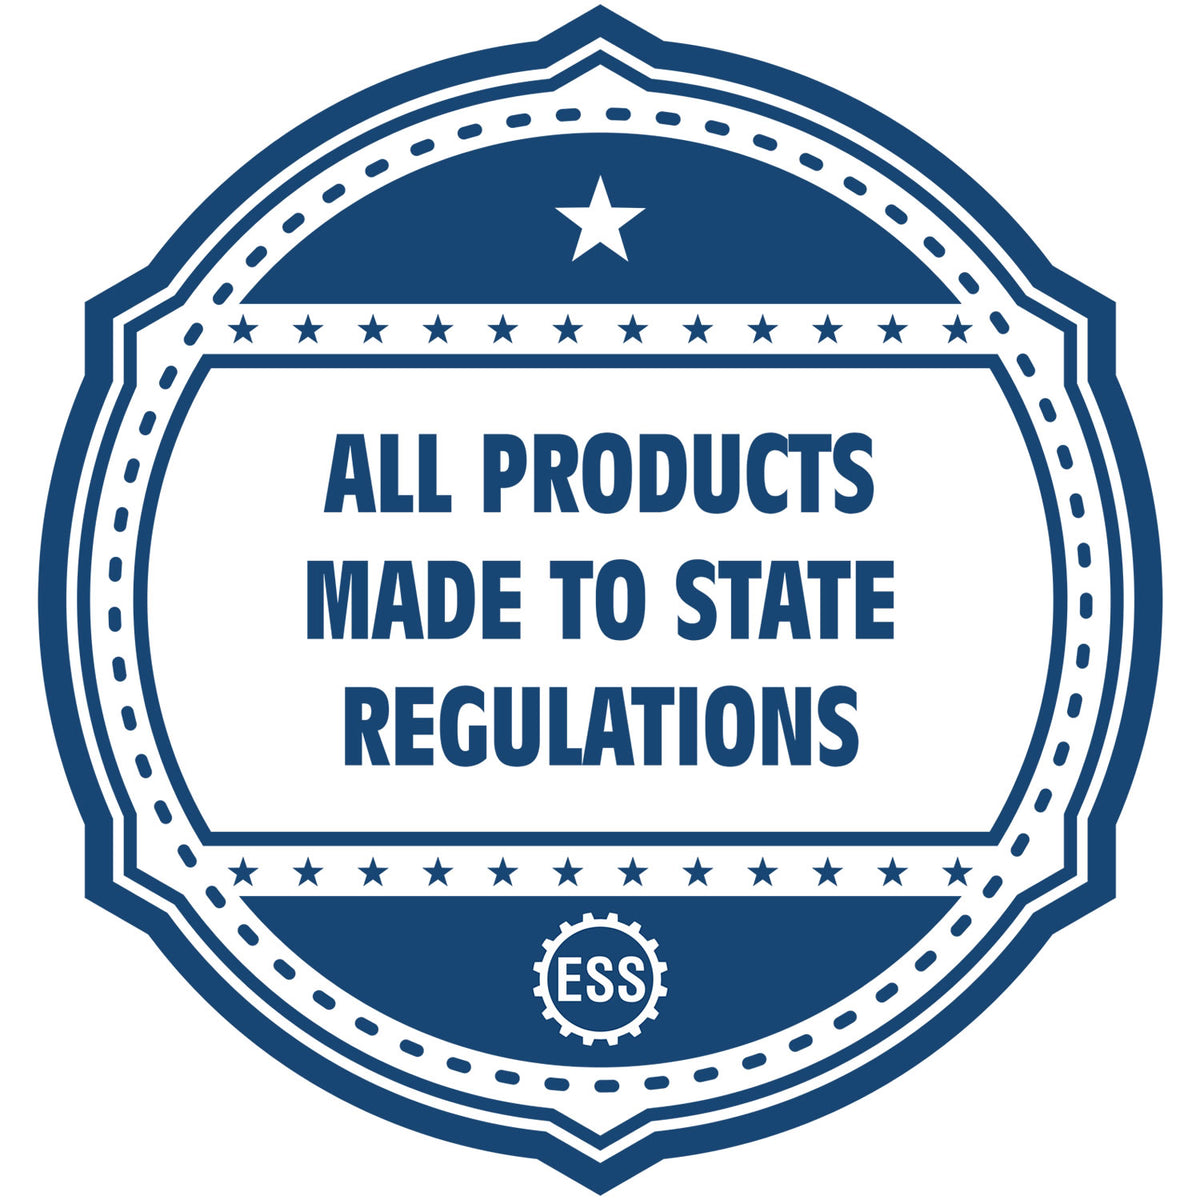 An icon or badge element for the State of Nevada Long Reach Architectural Embossing Seal showing that this product is made in compliance with state regulations.